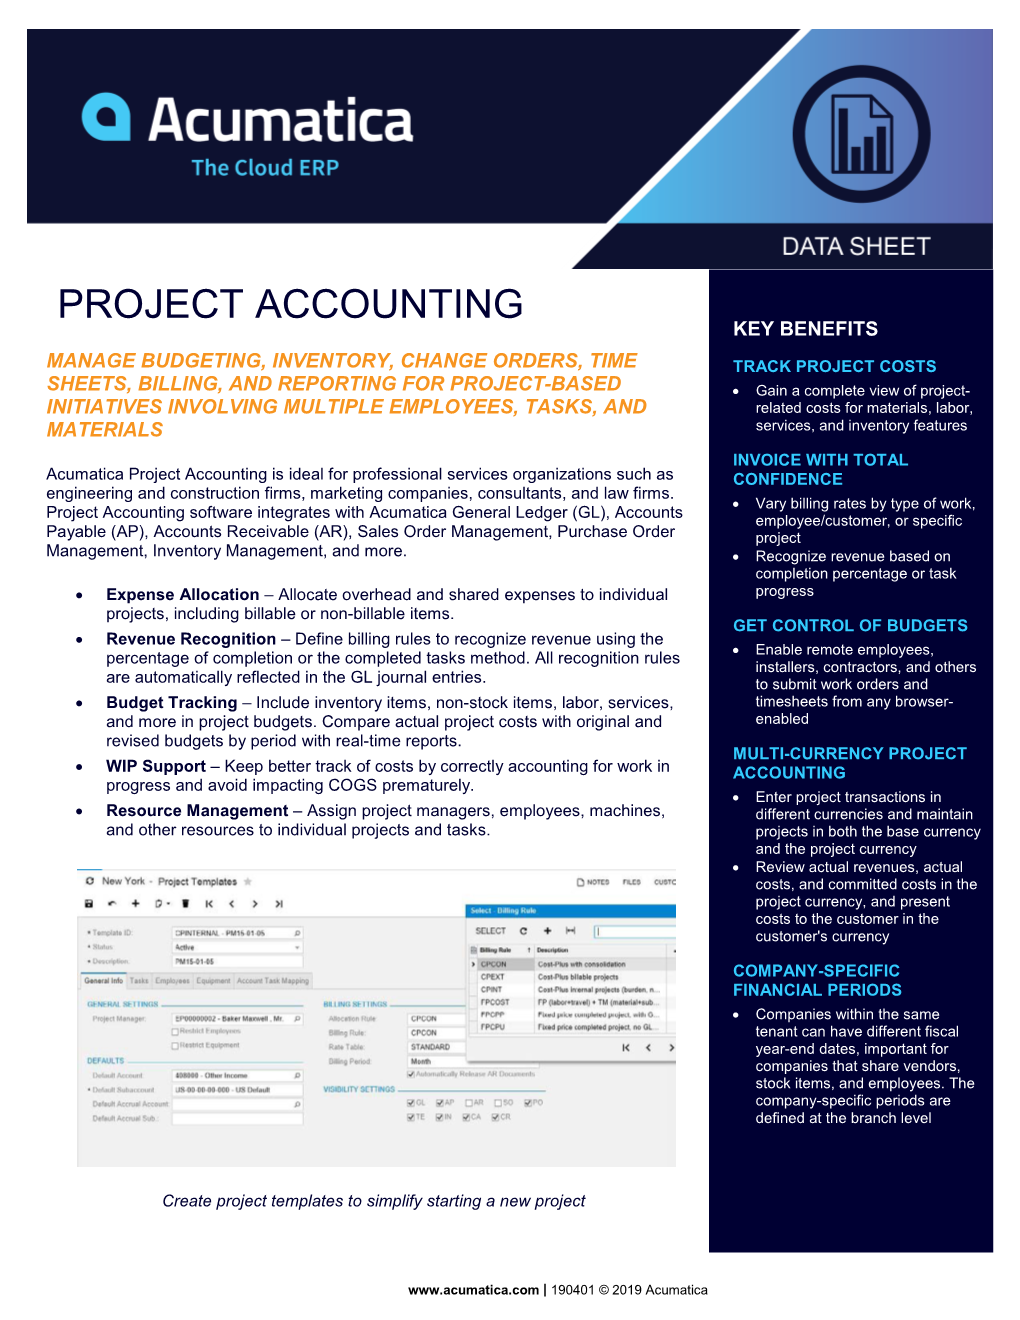 Project Accounting Key Benefits